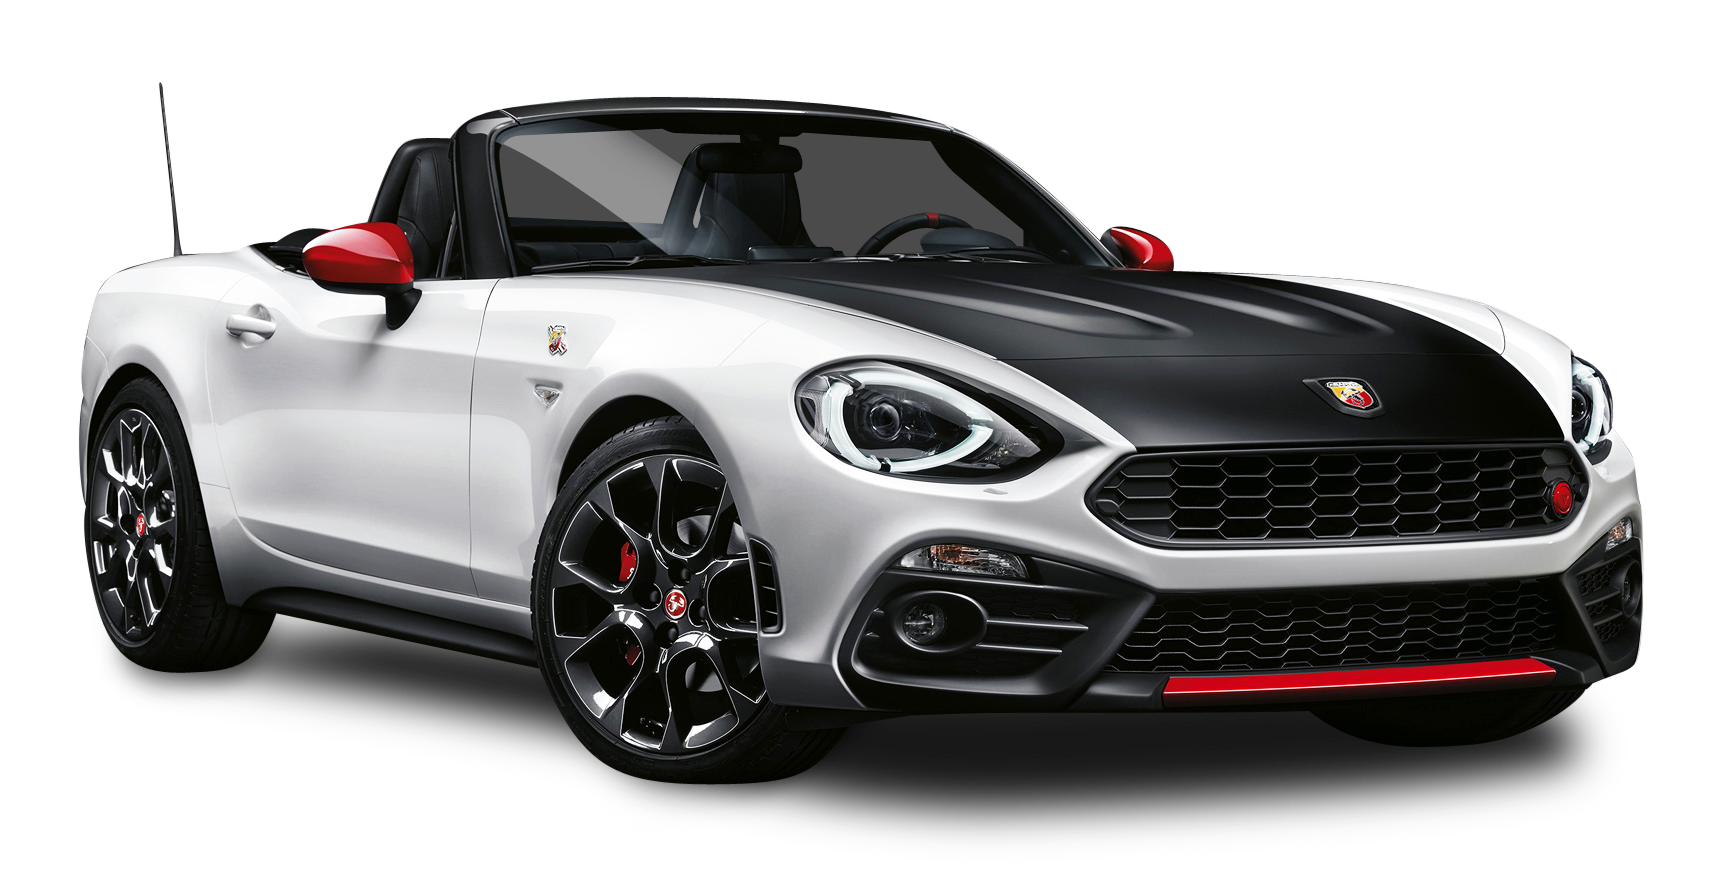 Fiat PNG HD Image